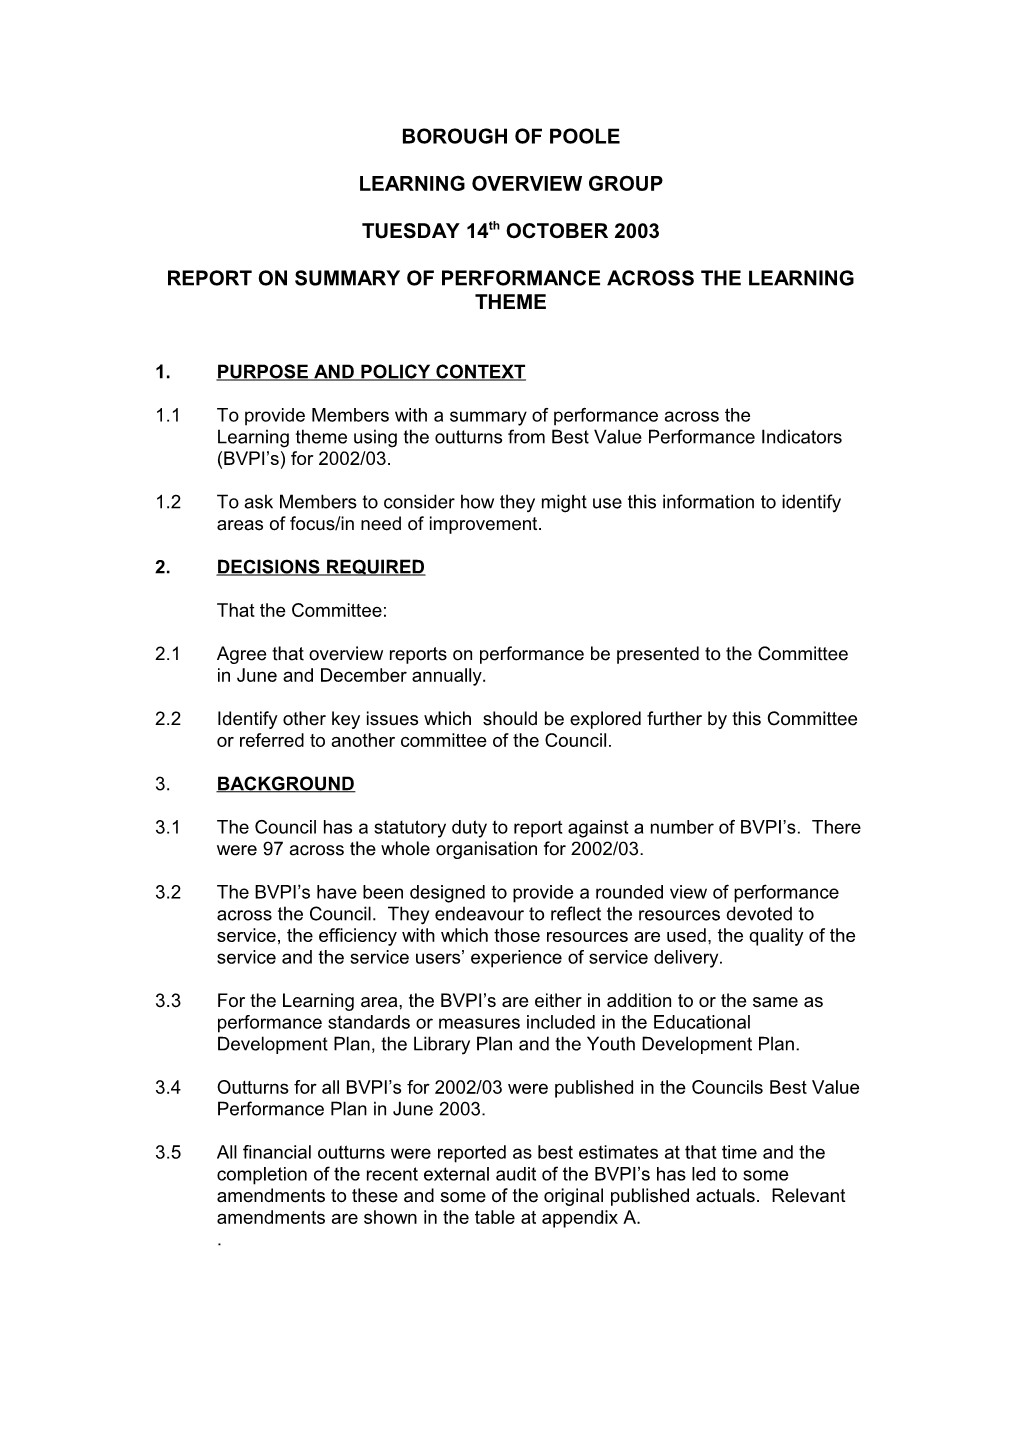 Report - Summary of Performance Accross the Learning Theme